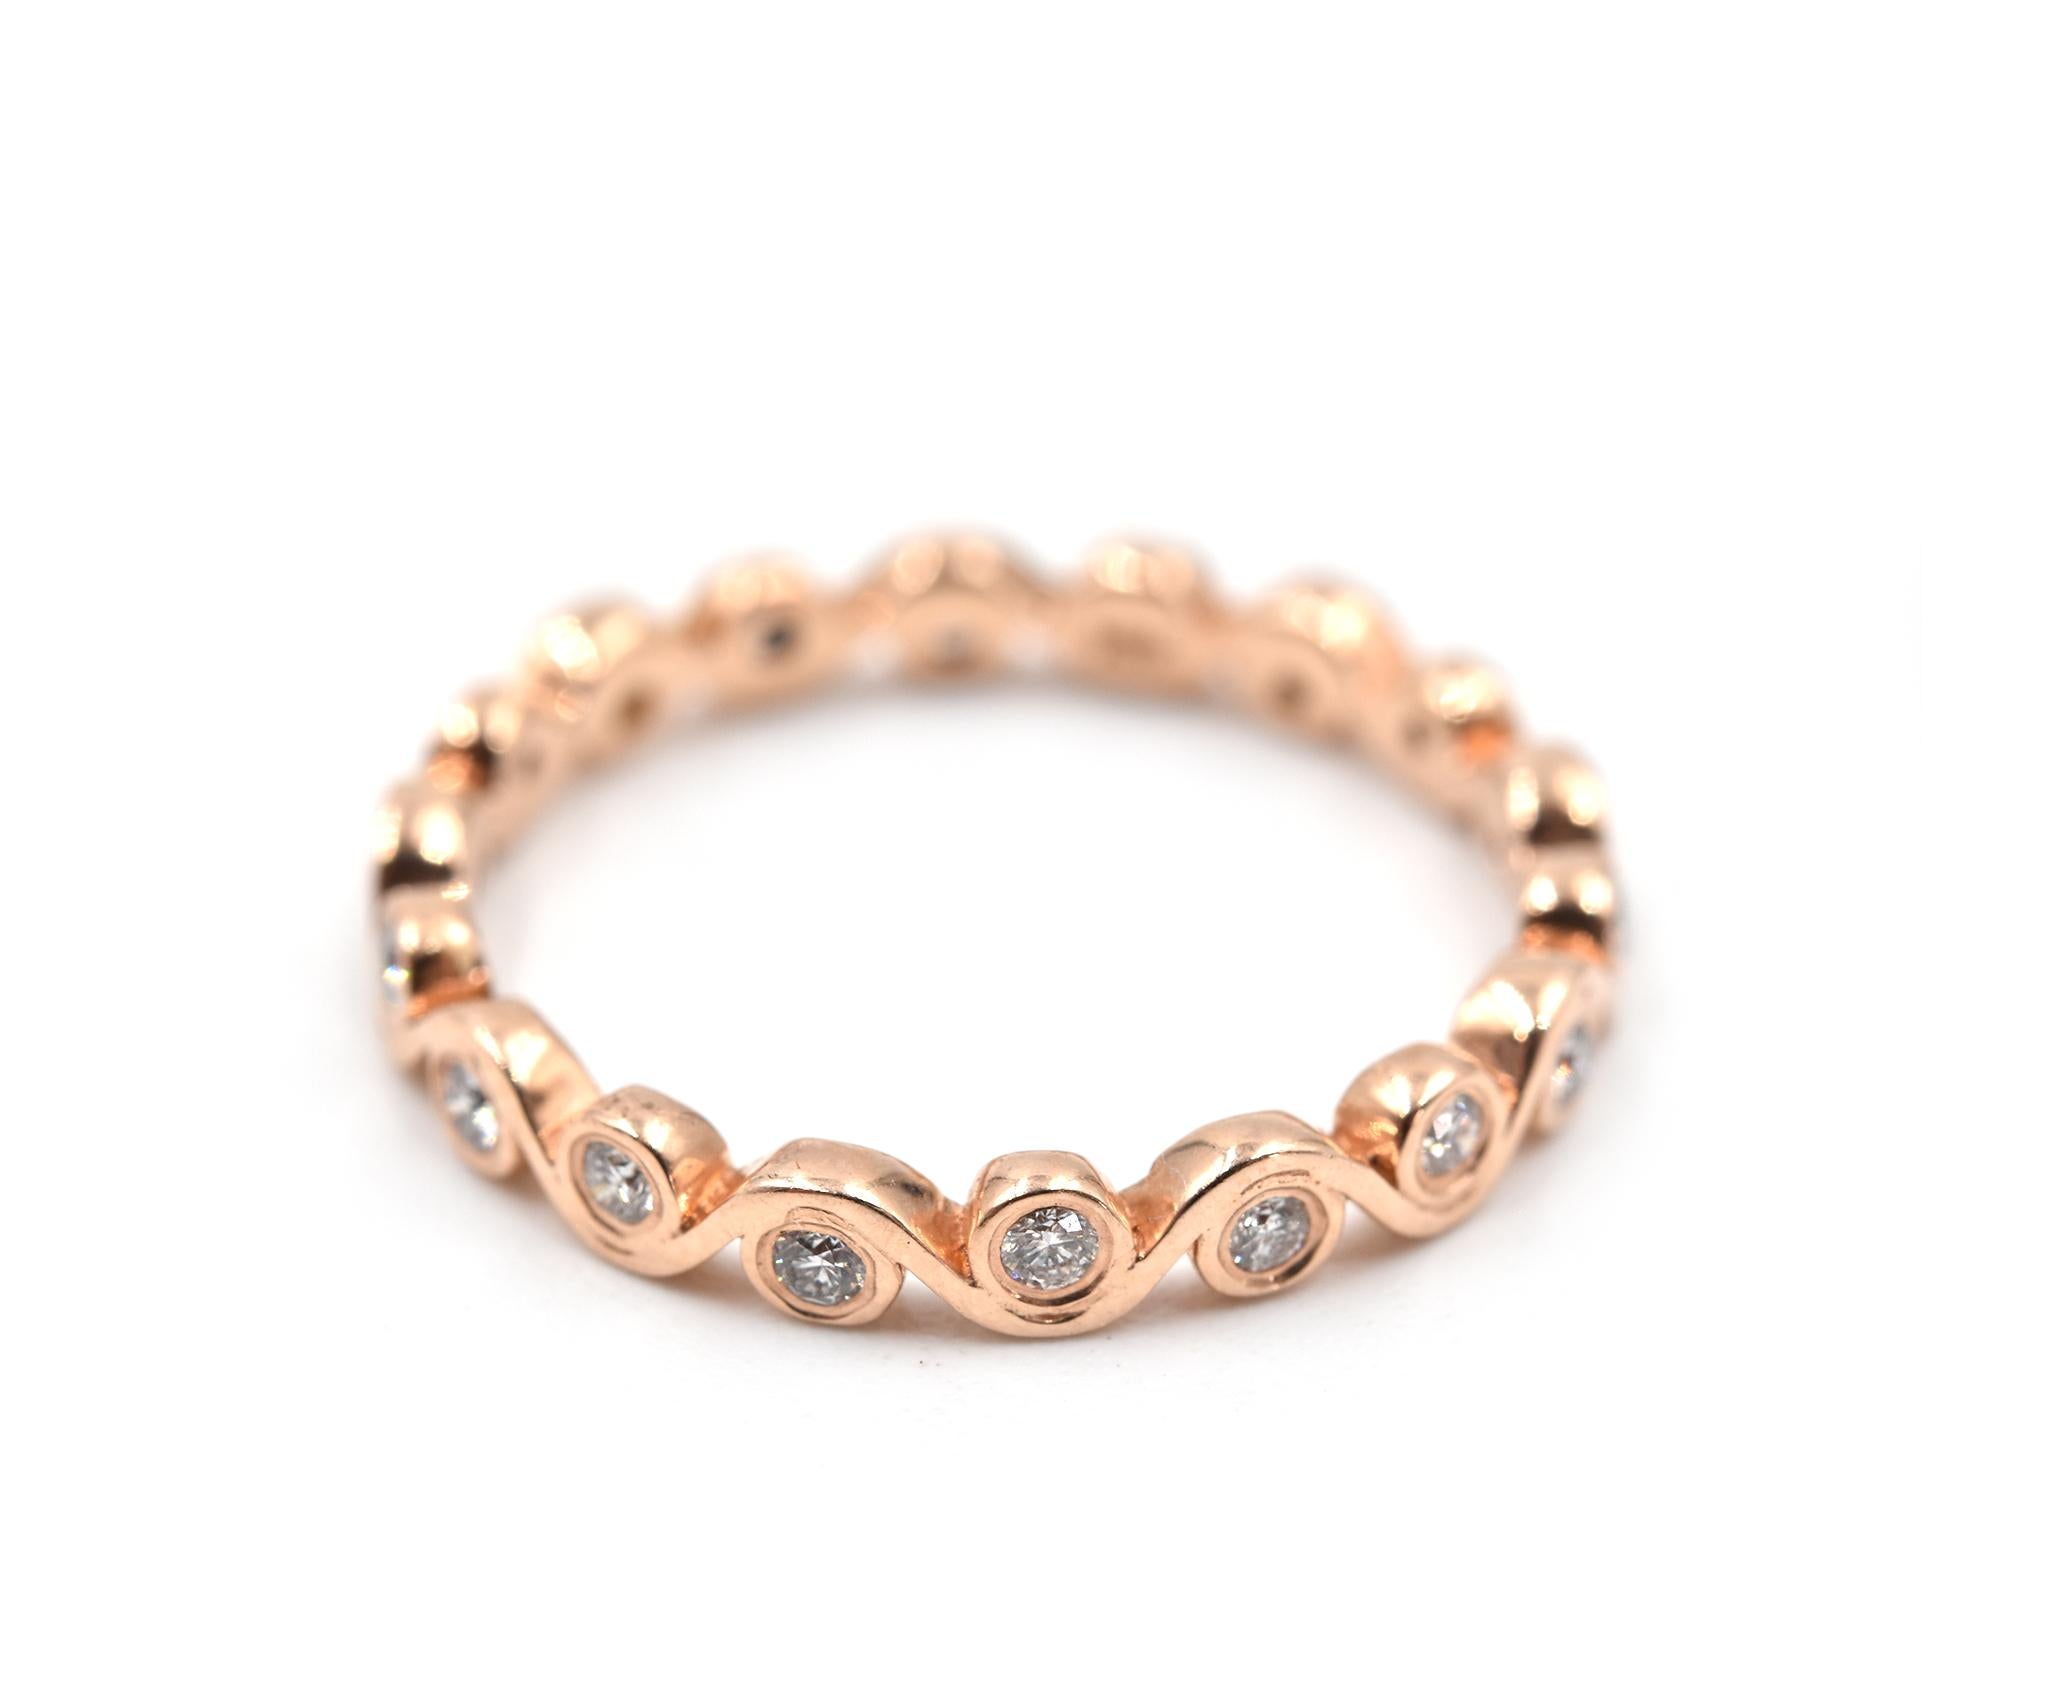 0.30 Carats Diamond 14k Rose Gold Swirl Style Eternity Band

Designer: custom design
Material: 14k rose gold
Diamonds: 18 round brilliant cut = 0.30 carat weight
Color: G
Clarity: VS
Ring size: 7 1/2 (please allow two additional shipping days for